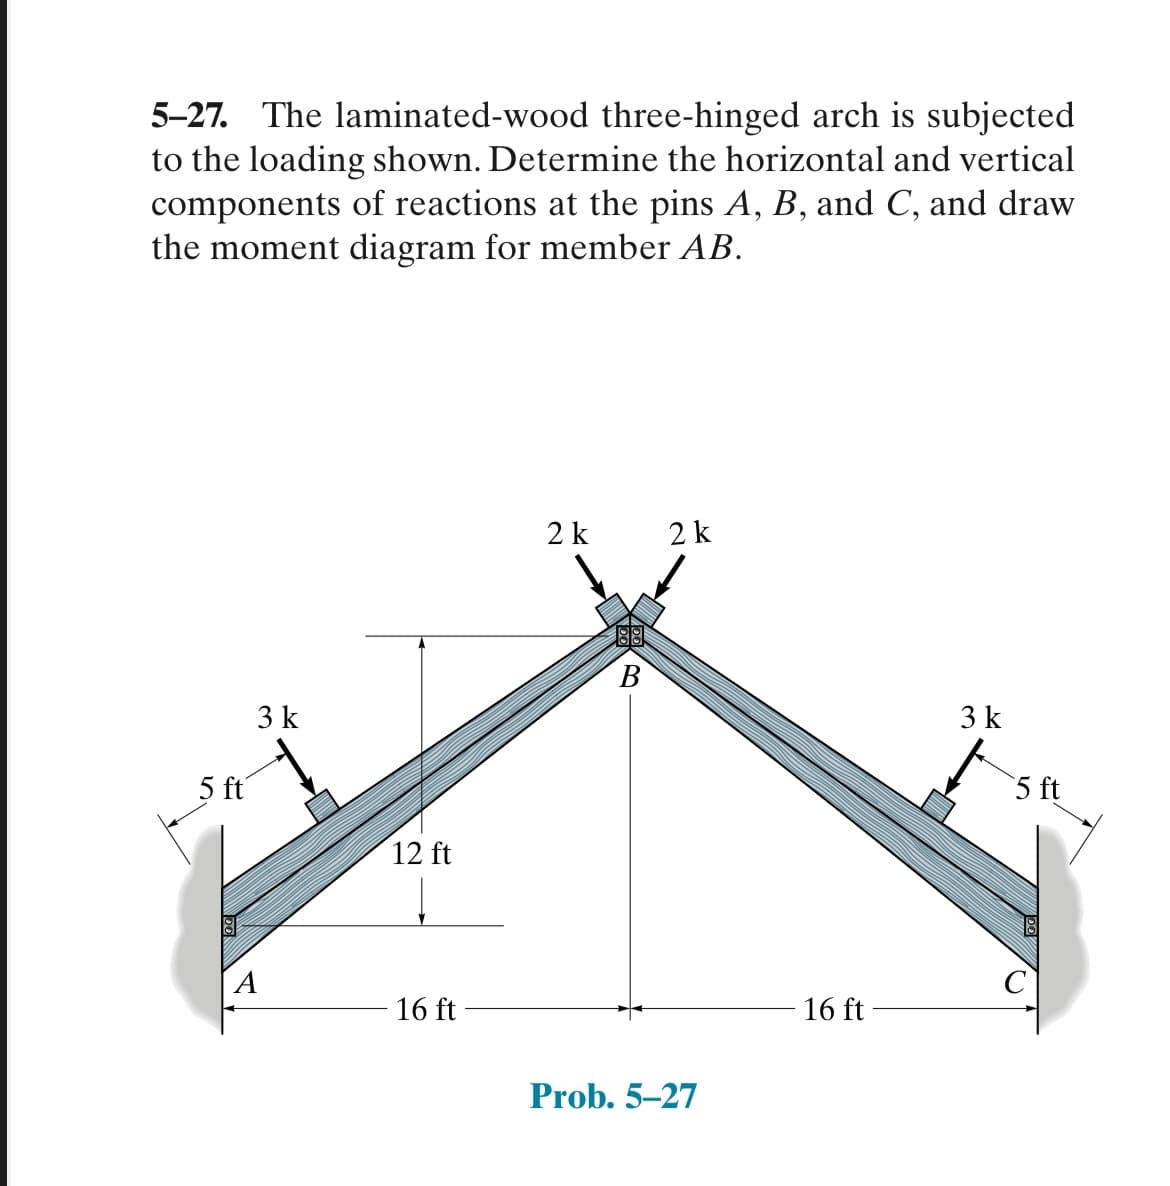 5-27. The laminated-wood three-hinged arch is subjected
to the loading shown. Determine the horizontal and vertical
components of reactions at the pins A, B, and C, and draw
the moment diagram for member AB.
5 ft
3 k
12 ft
16 ft
2 k
B
2 k
Prob. 5-27
16 ft
3 k
5 ft